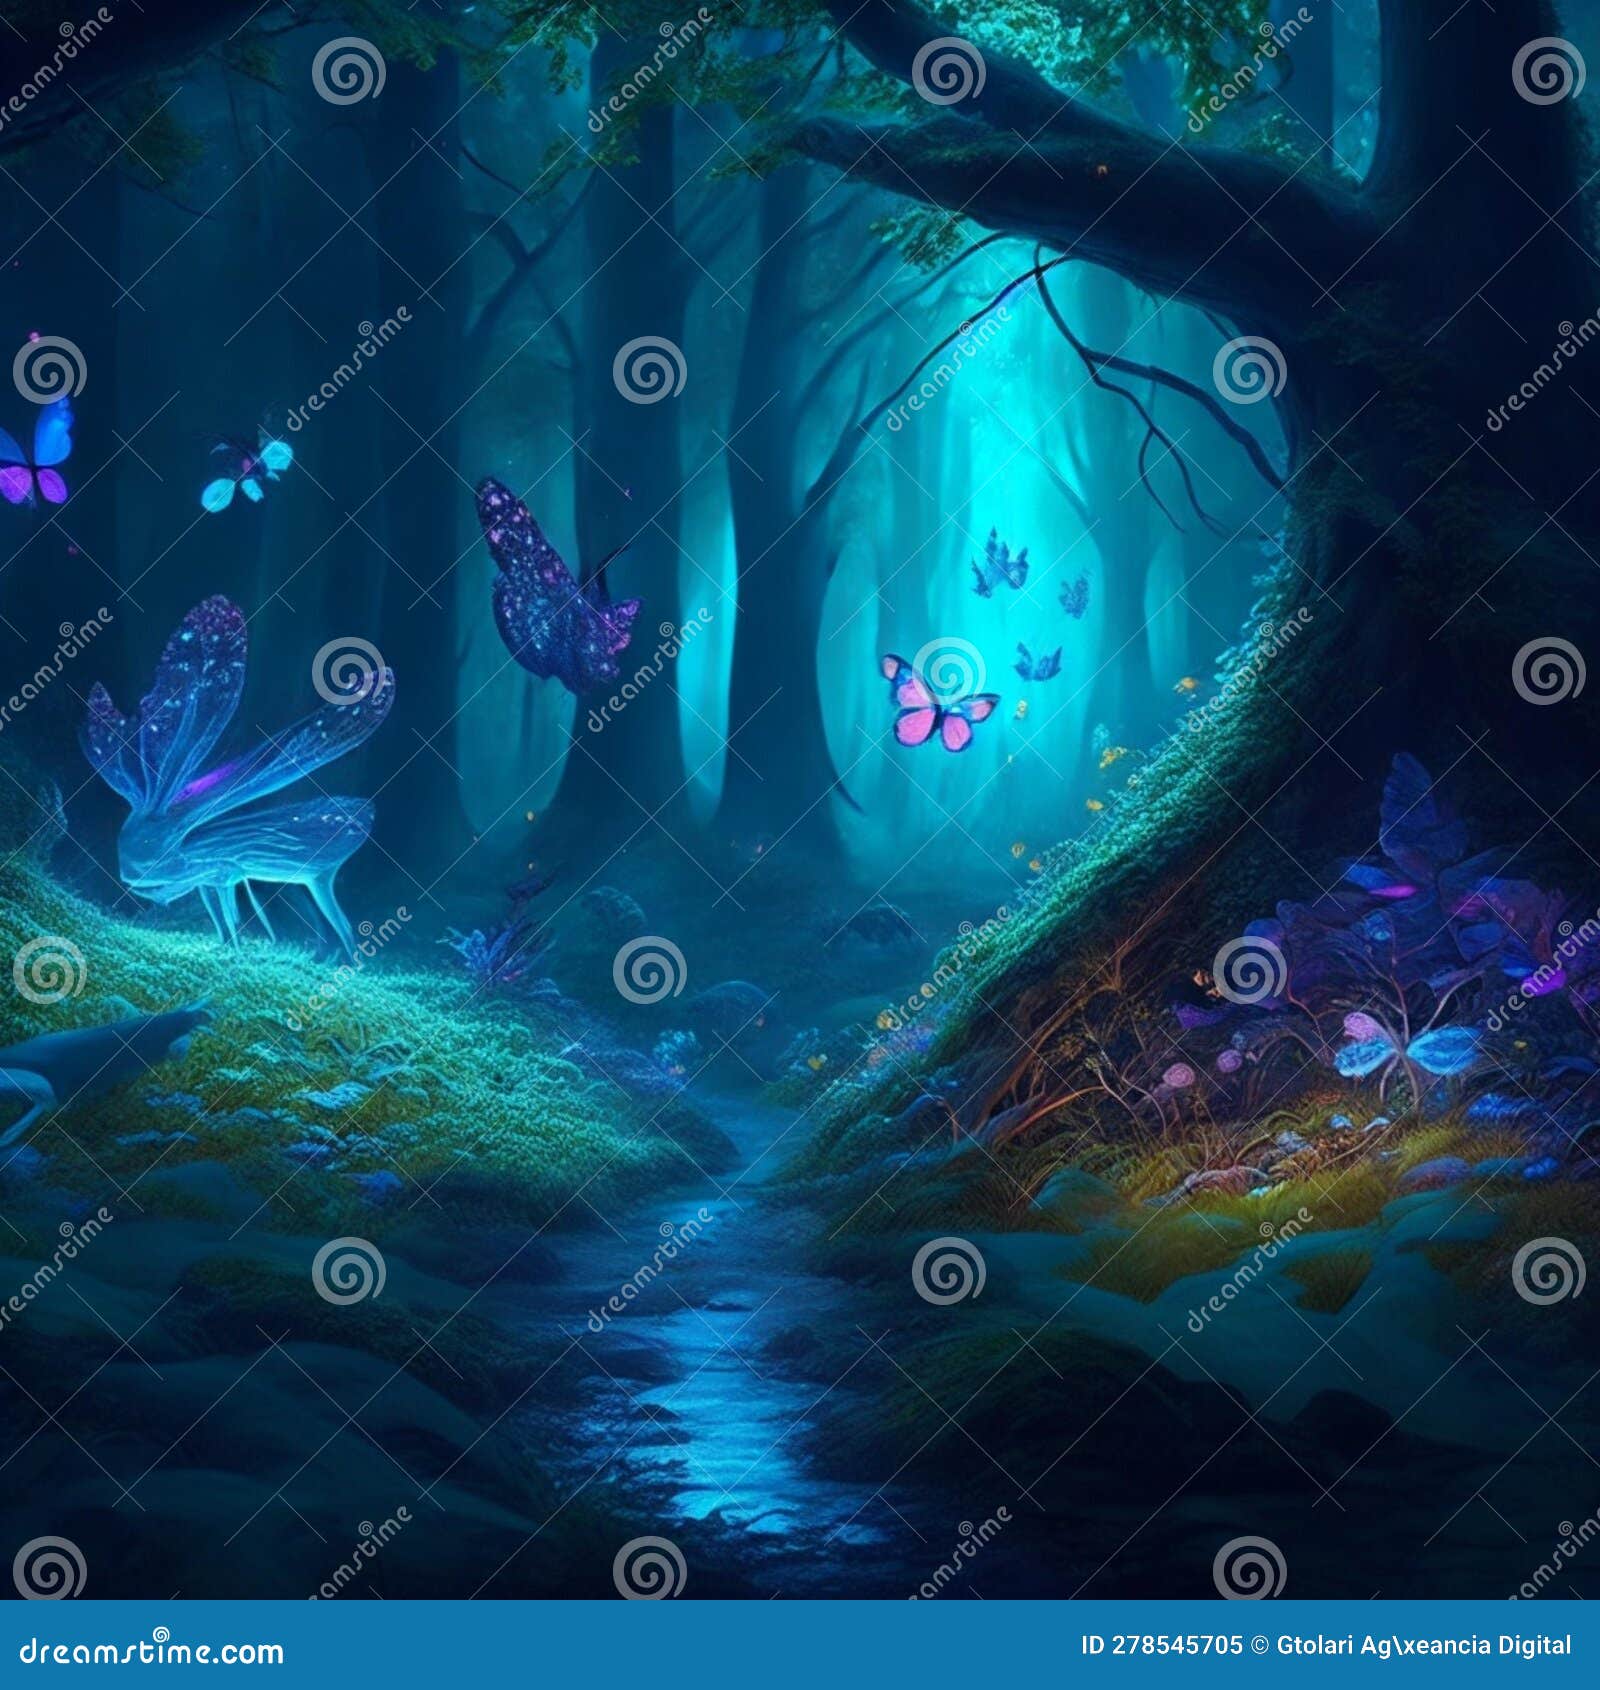 enchanted forest with sparkles, mythical plants and creatures, magical animals, butterflies